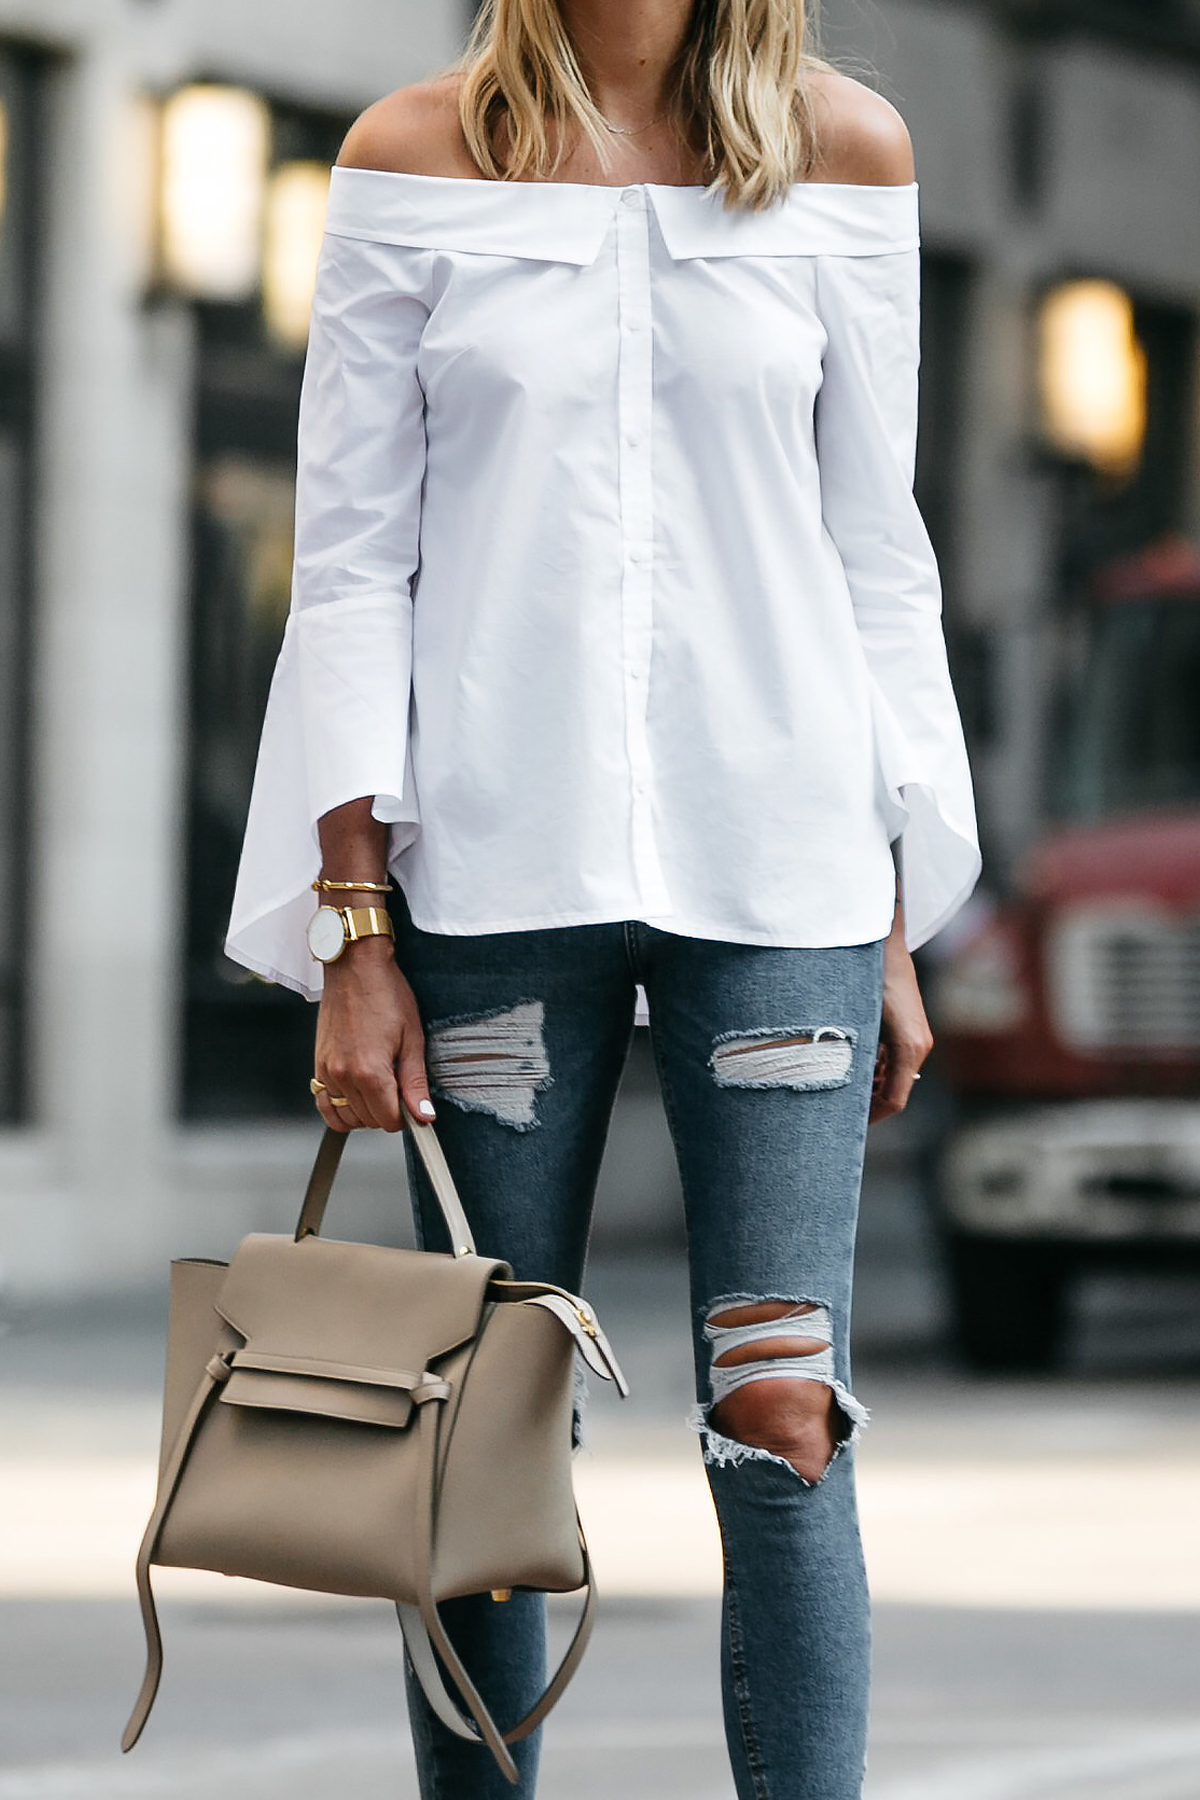 Nordstrom Anniversary Sale White Bell-Sleeve off-the-shoulder Top Topshop Denim Ripped Skinny Jeans Outfit Celine Belt Bag Fashion Jackson Dallas Blogger Fashion Blogger Street Style